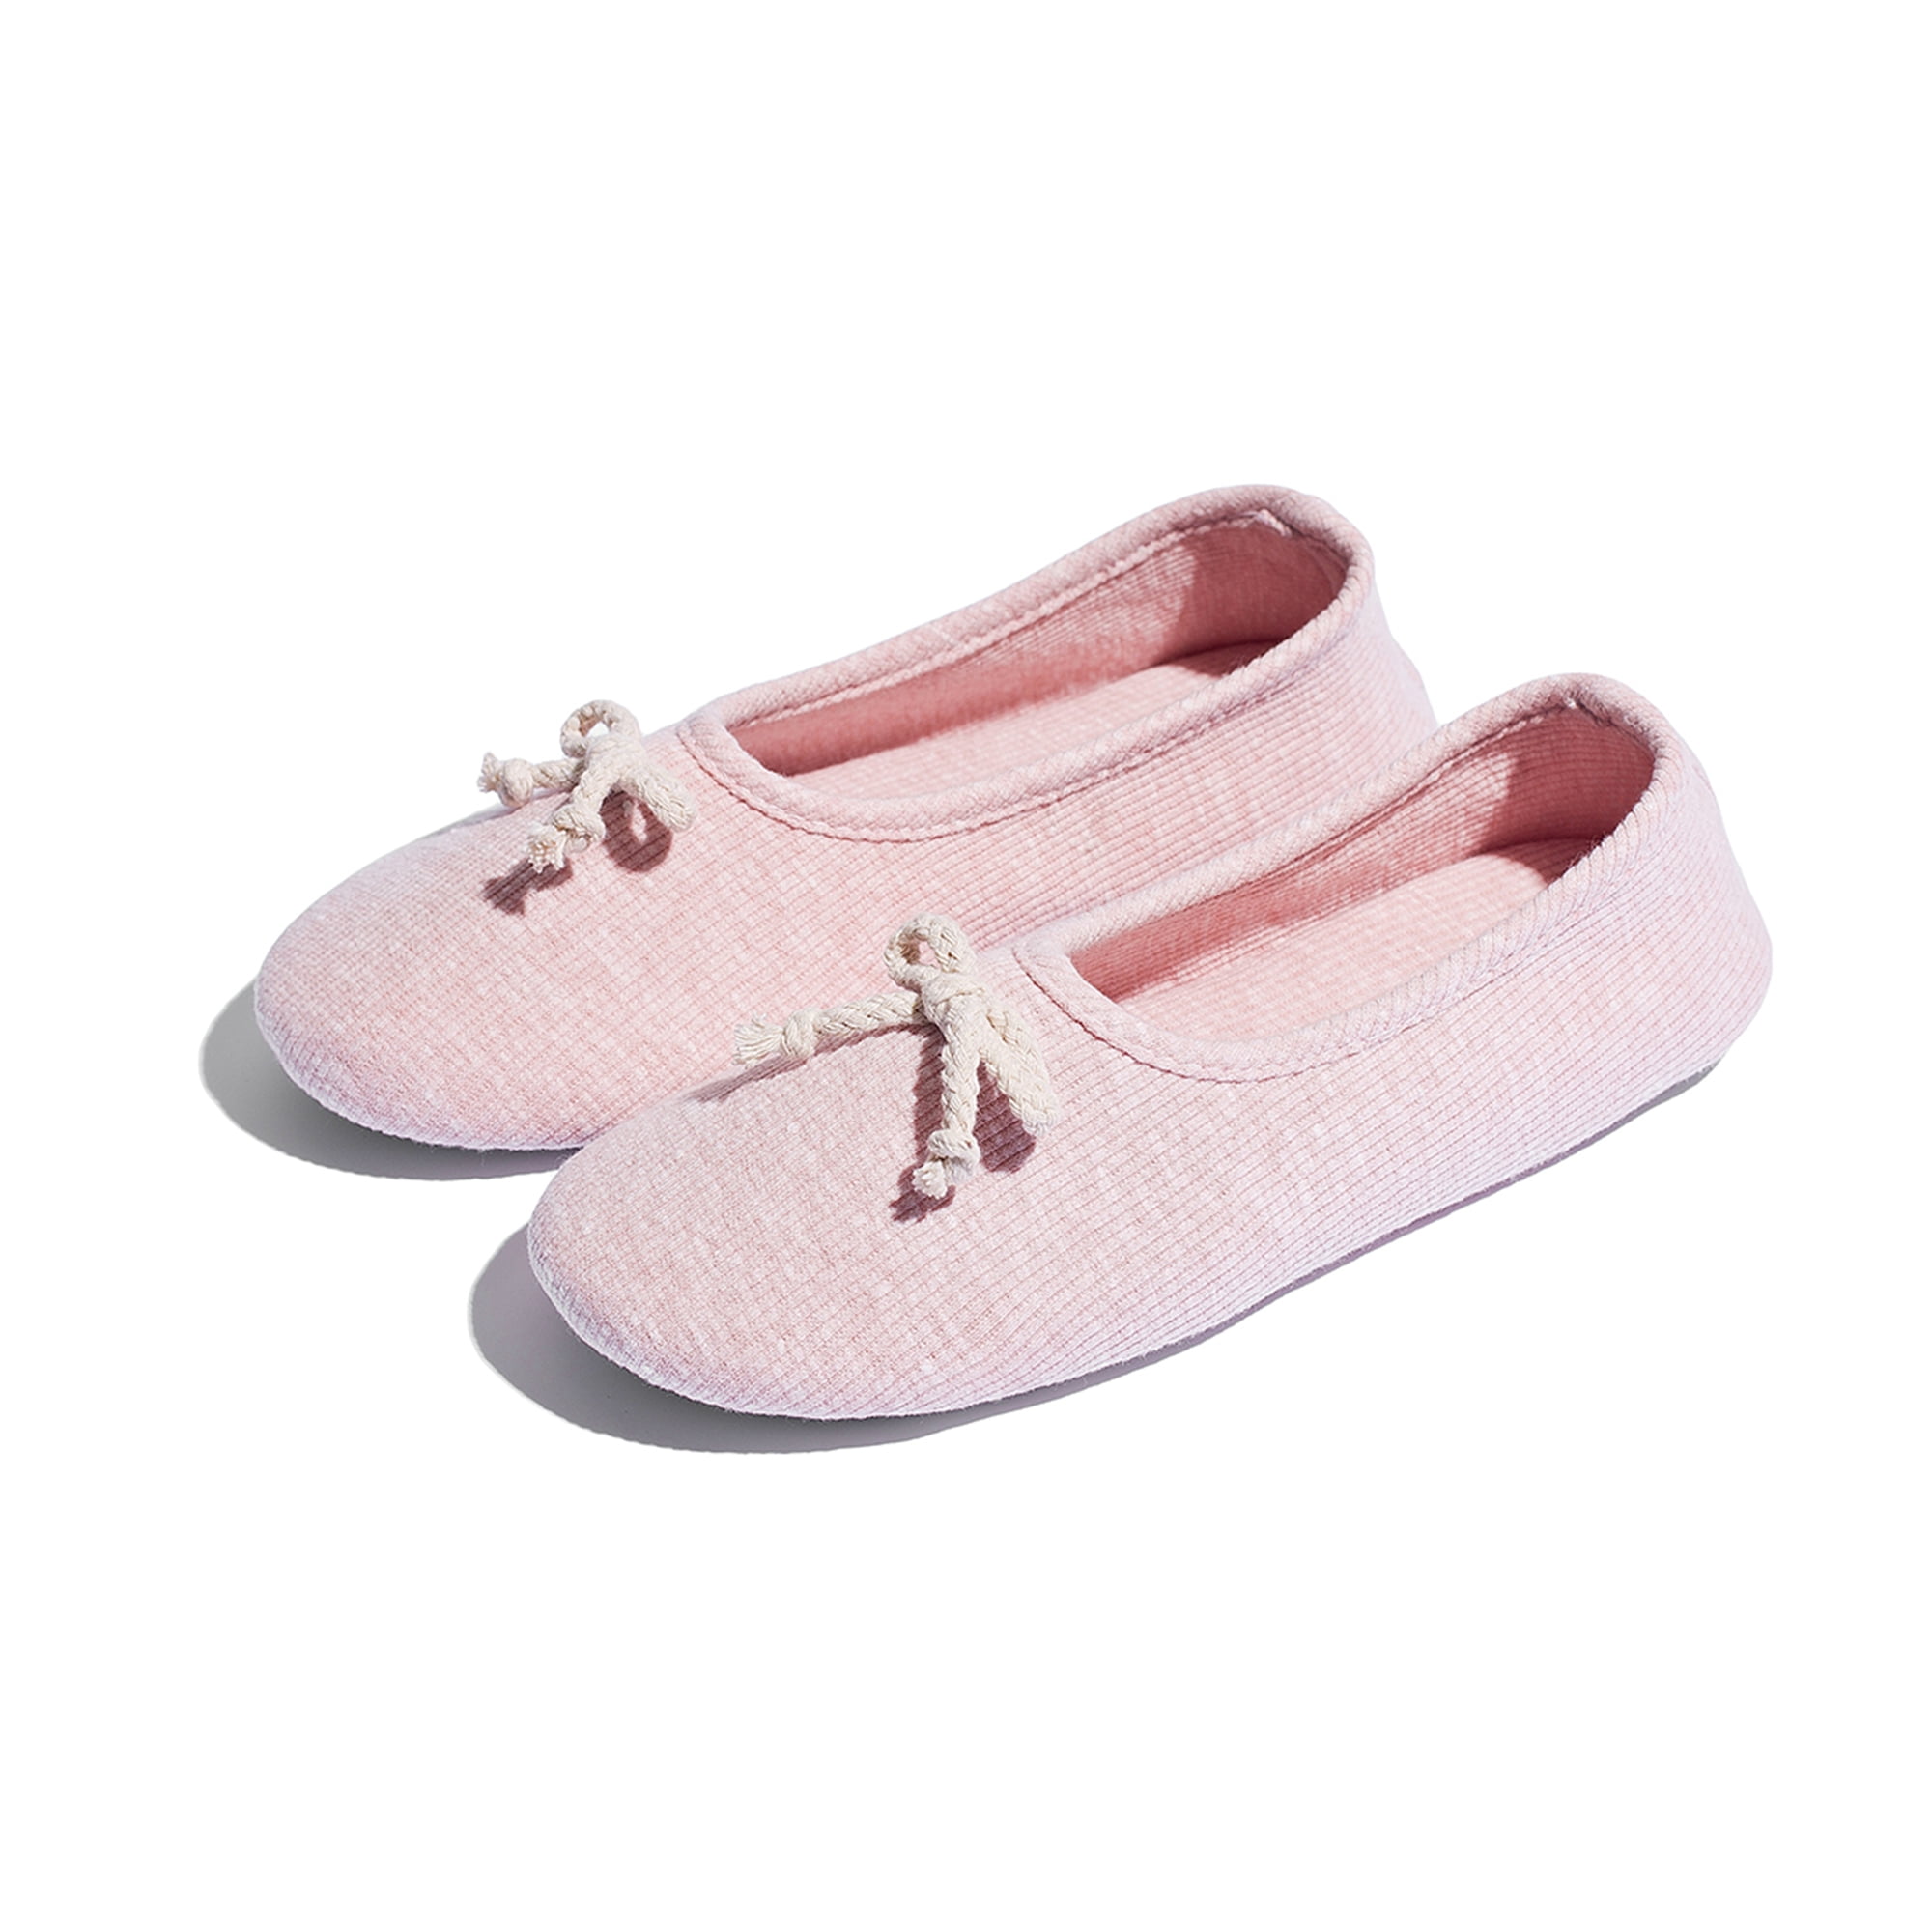 ballet style house slippers